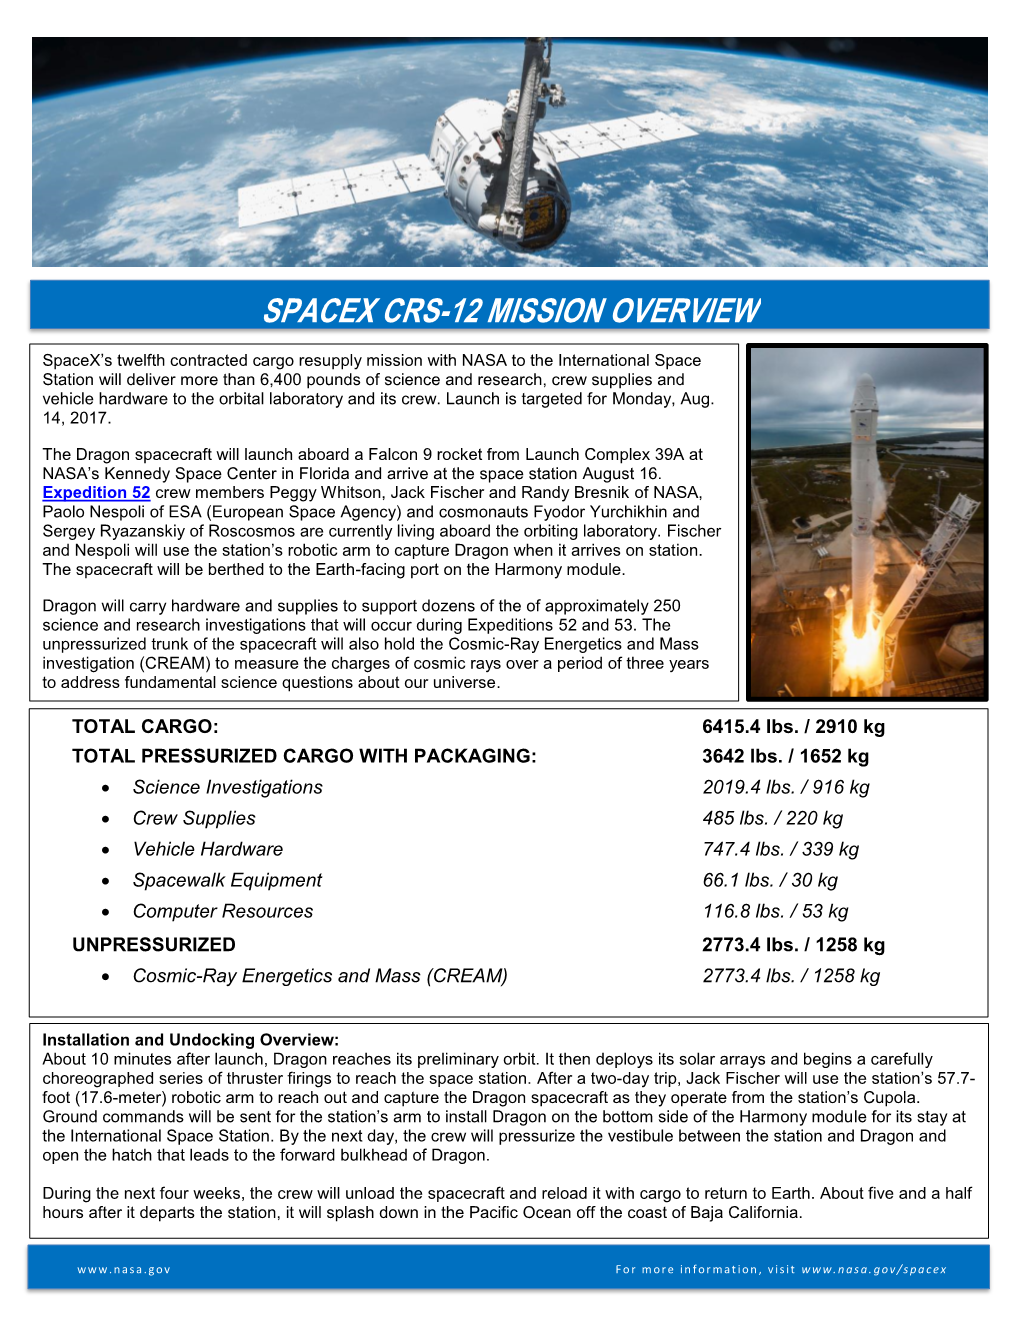 Spacex Crs-12 Mission Overview